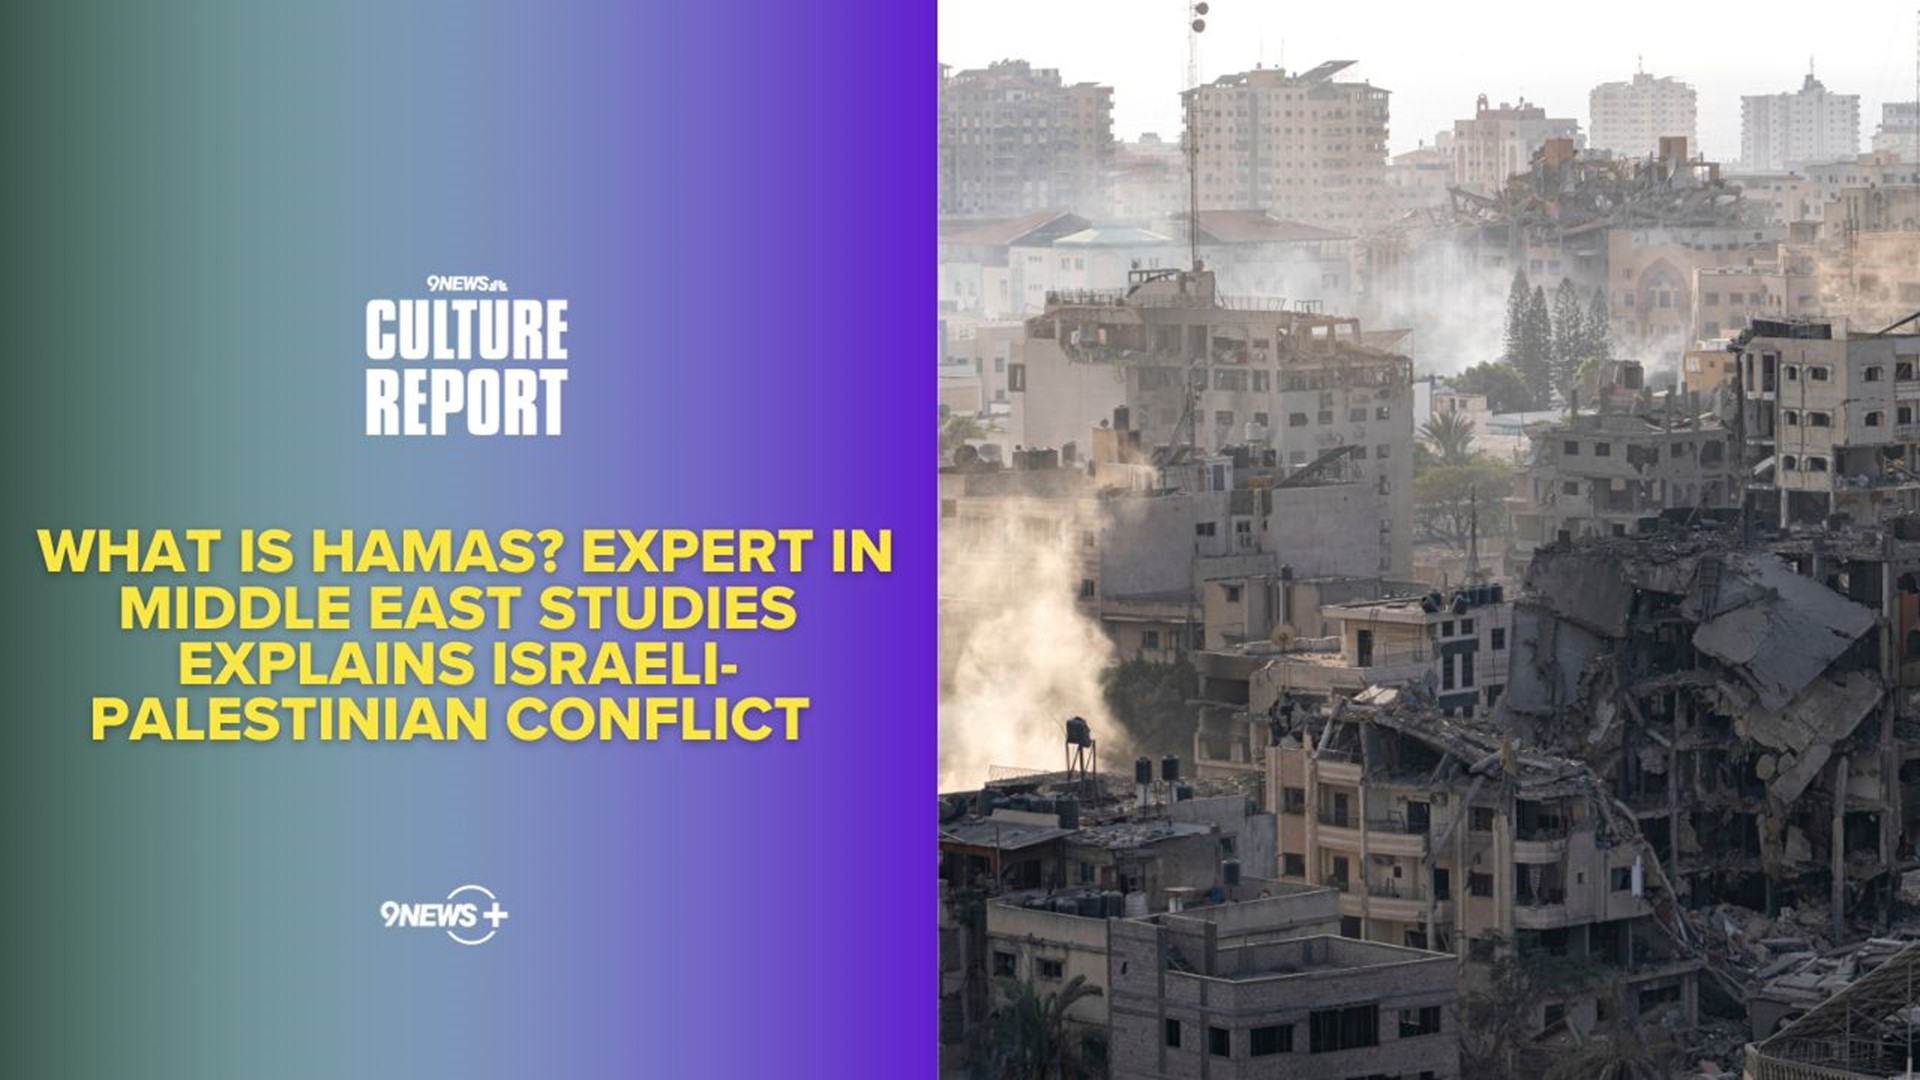 In this week's Culture Report: DU Professor Micheline Ishay discusses the conflict between Israel and the Palestinian militant group Hamas.